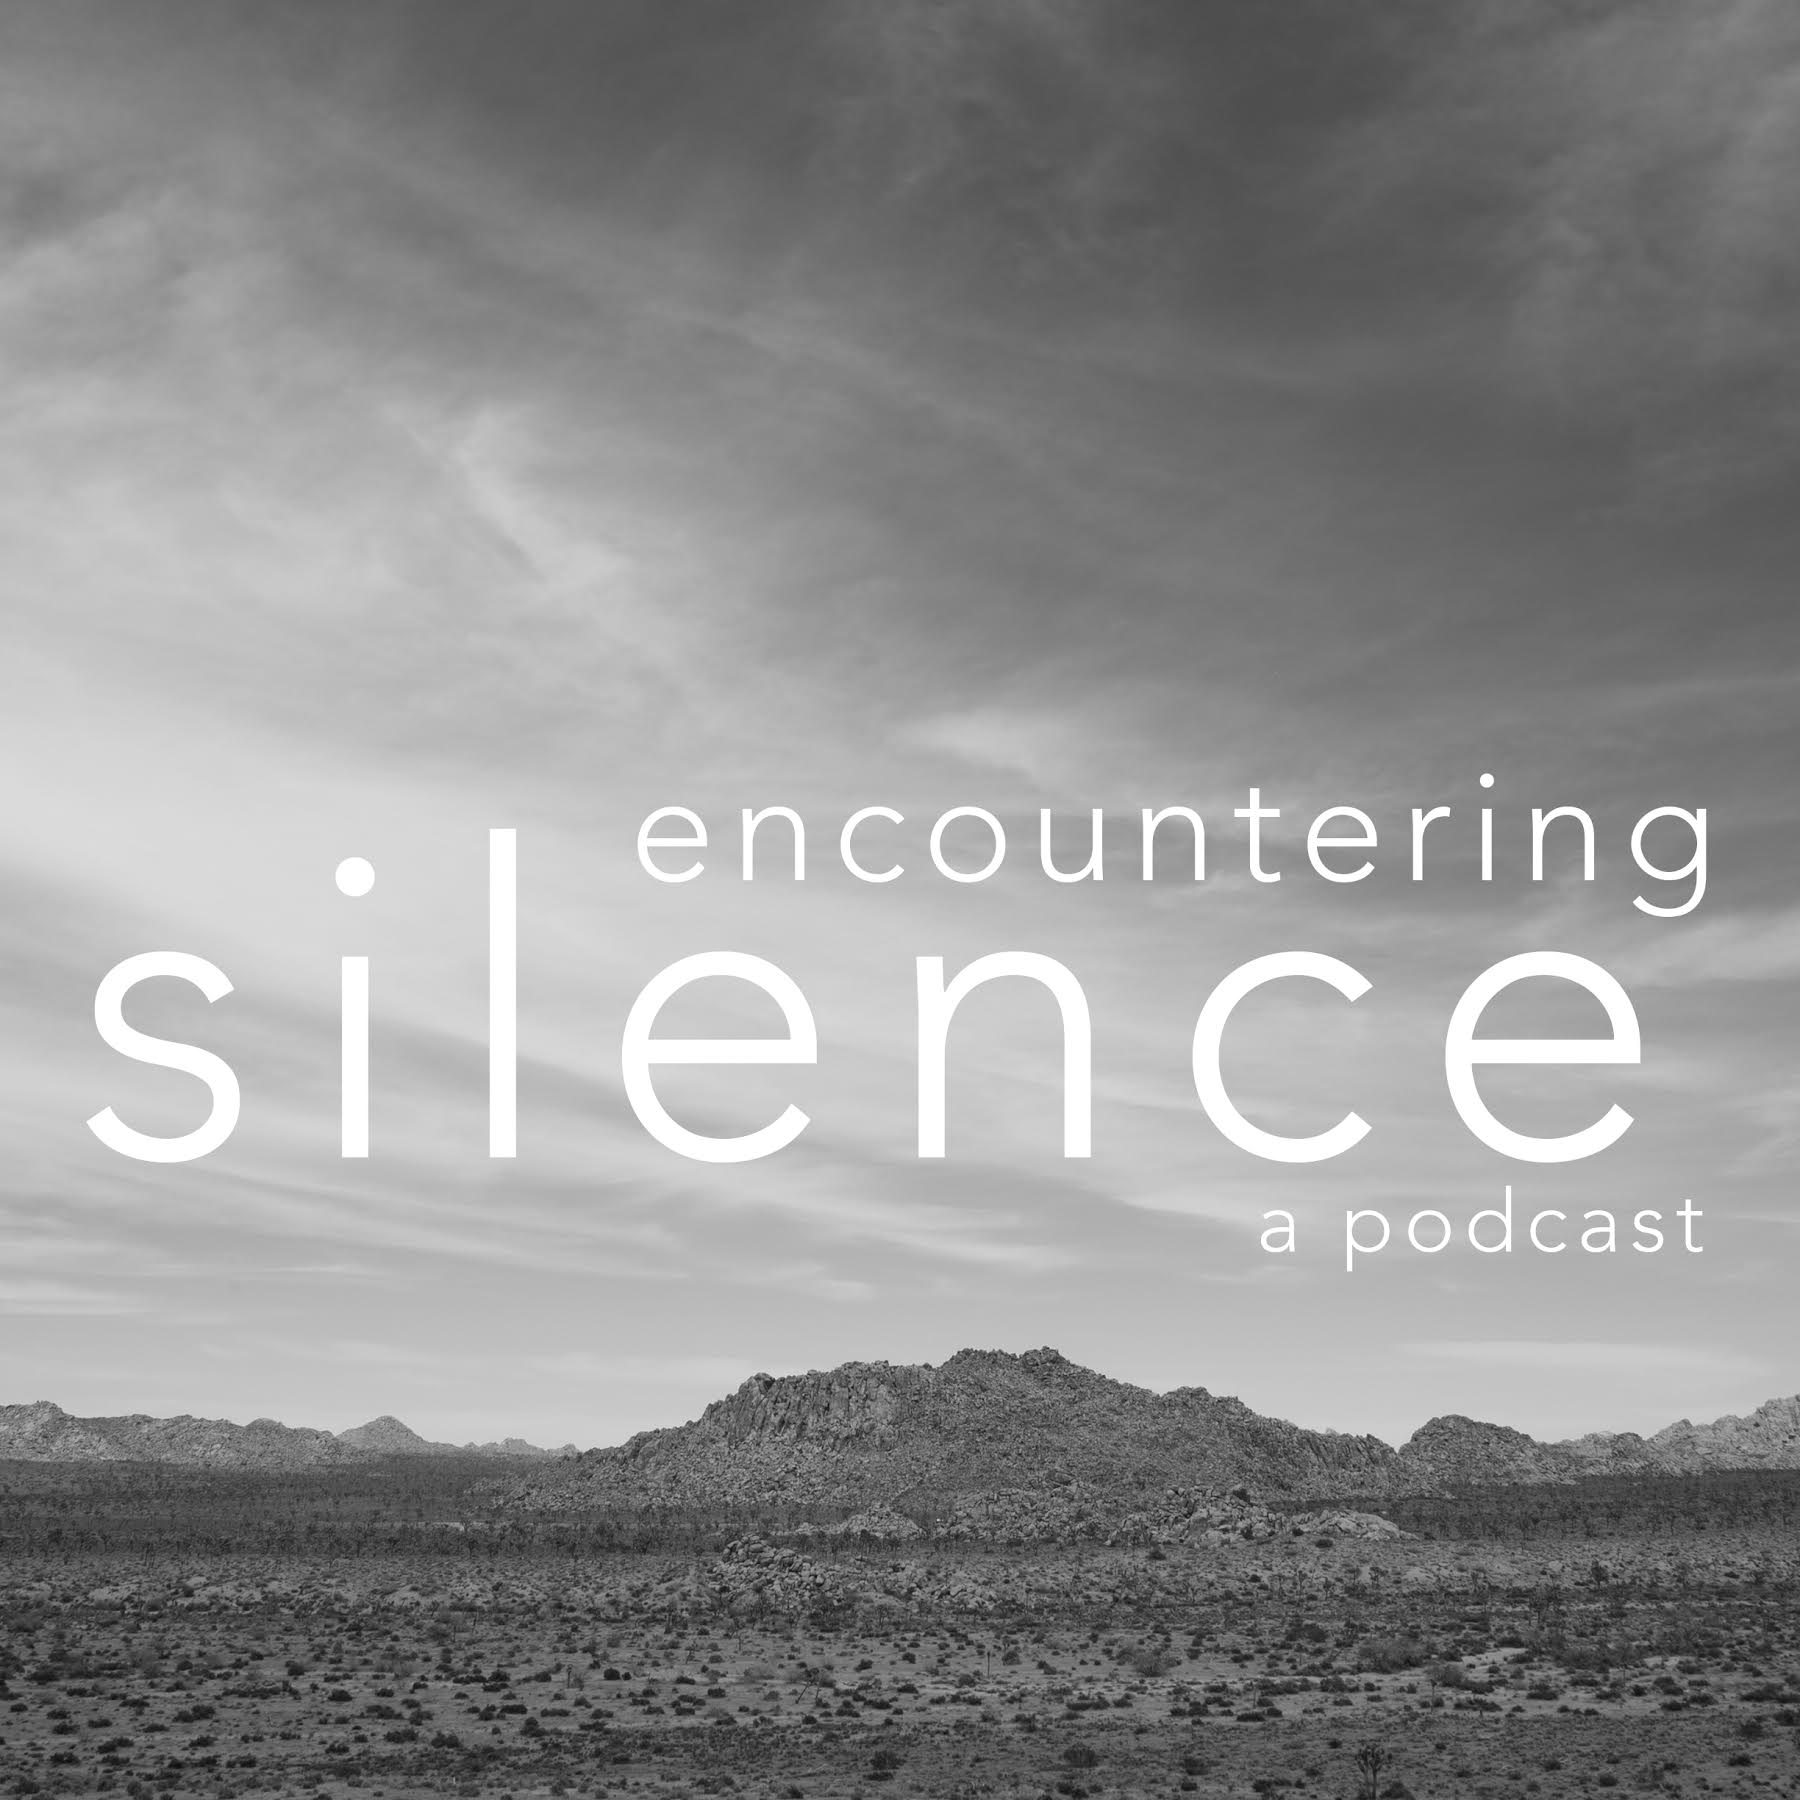 James Finley: A Conversation on the Spirituality of Silence (Part Two)